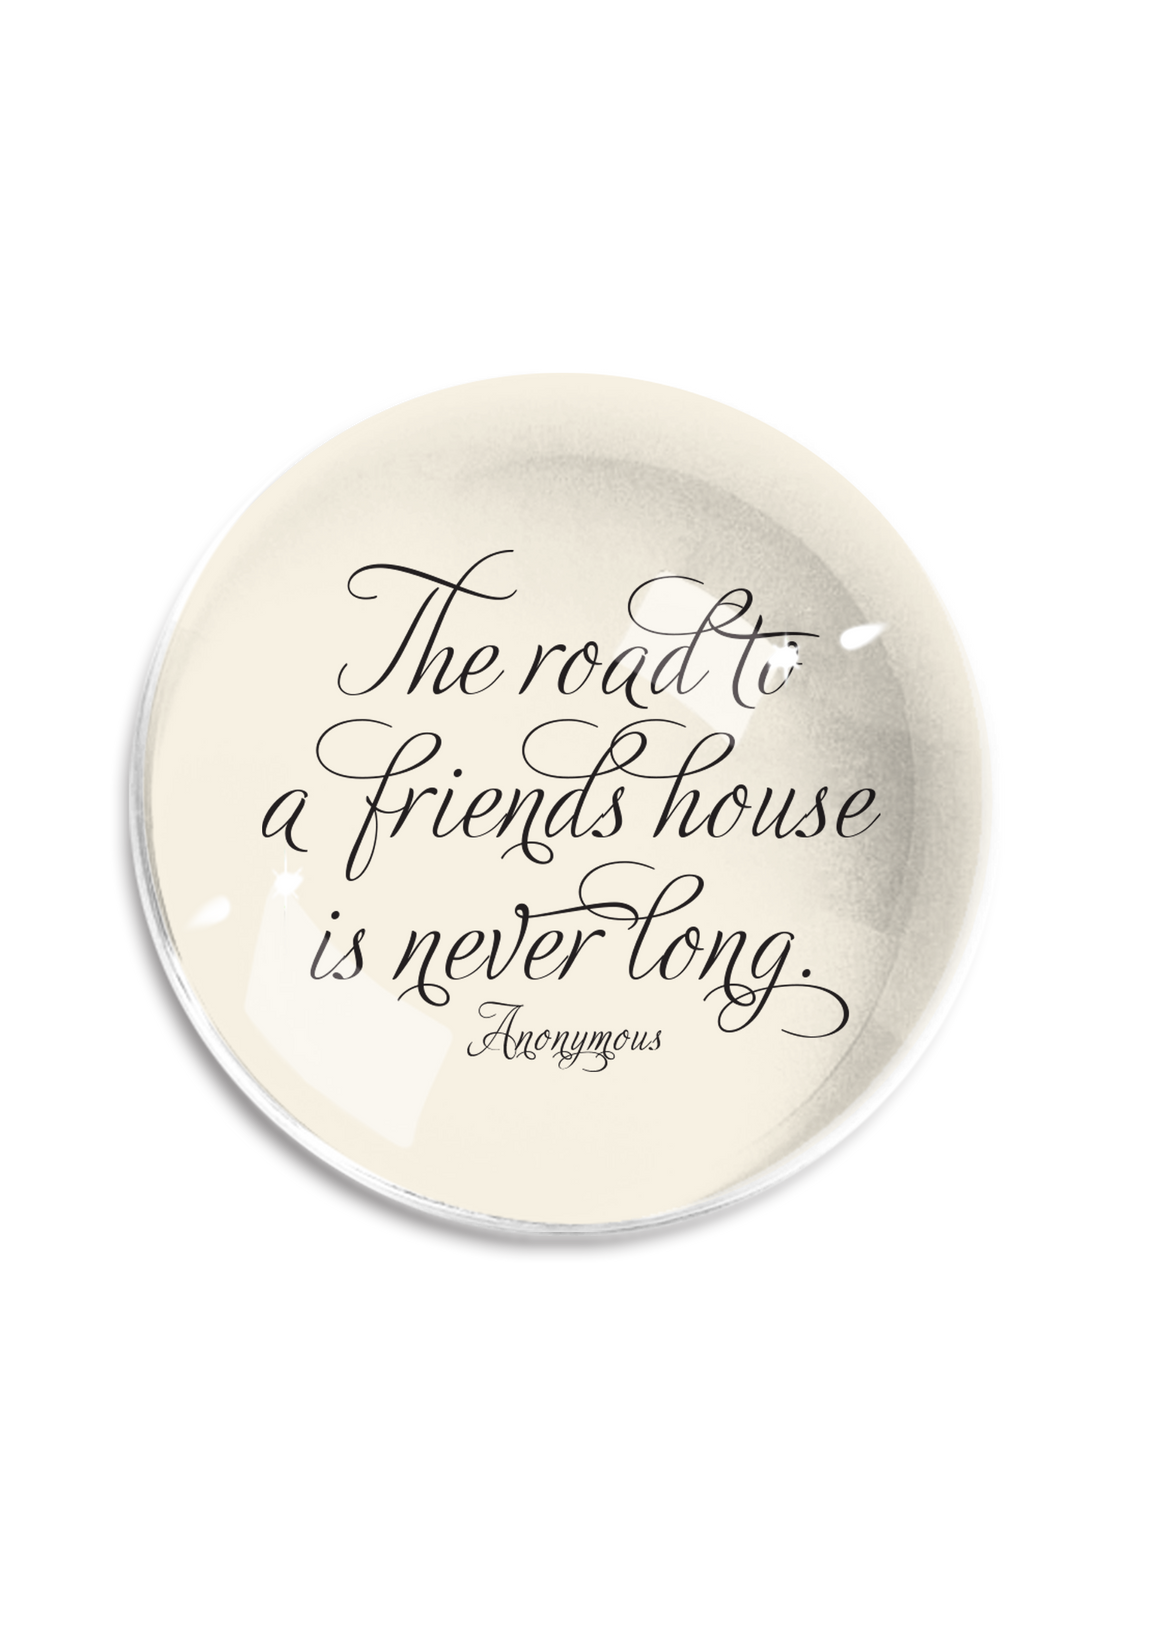 Bensgarden.com | The Road To A Friend's House Crystal Dome Paperweight - Ben's Garden. Made in New York City.